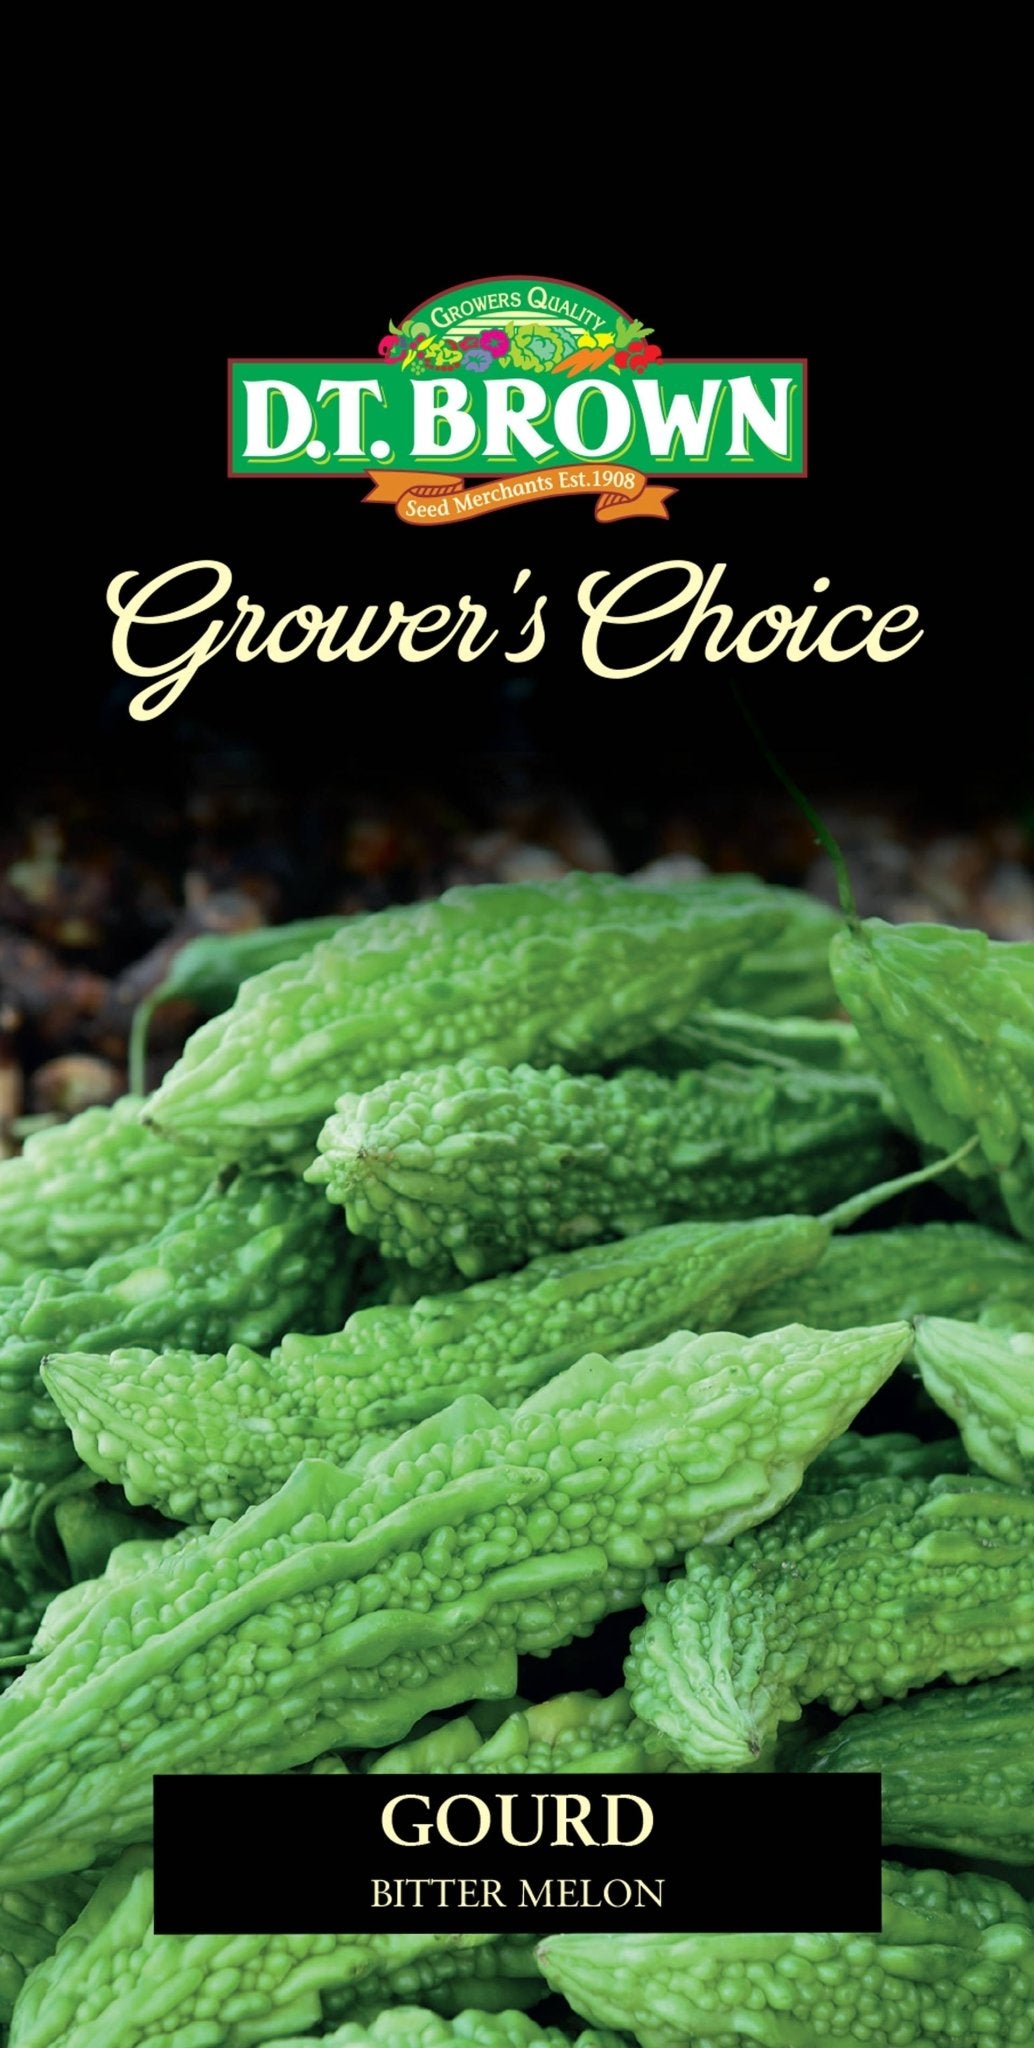 DT Brown Growers Choice Gourd Bitter Melon - Woonona Petfood & Produce